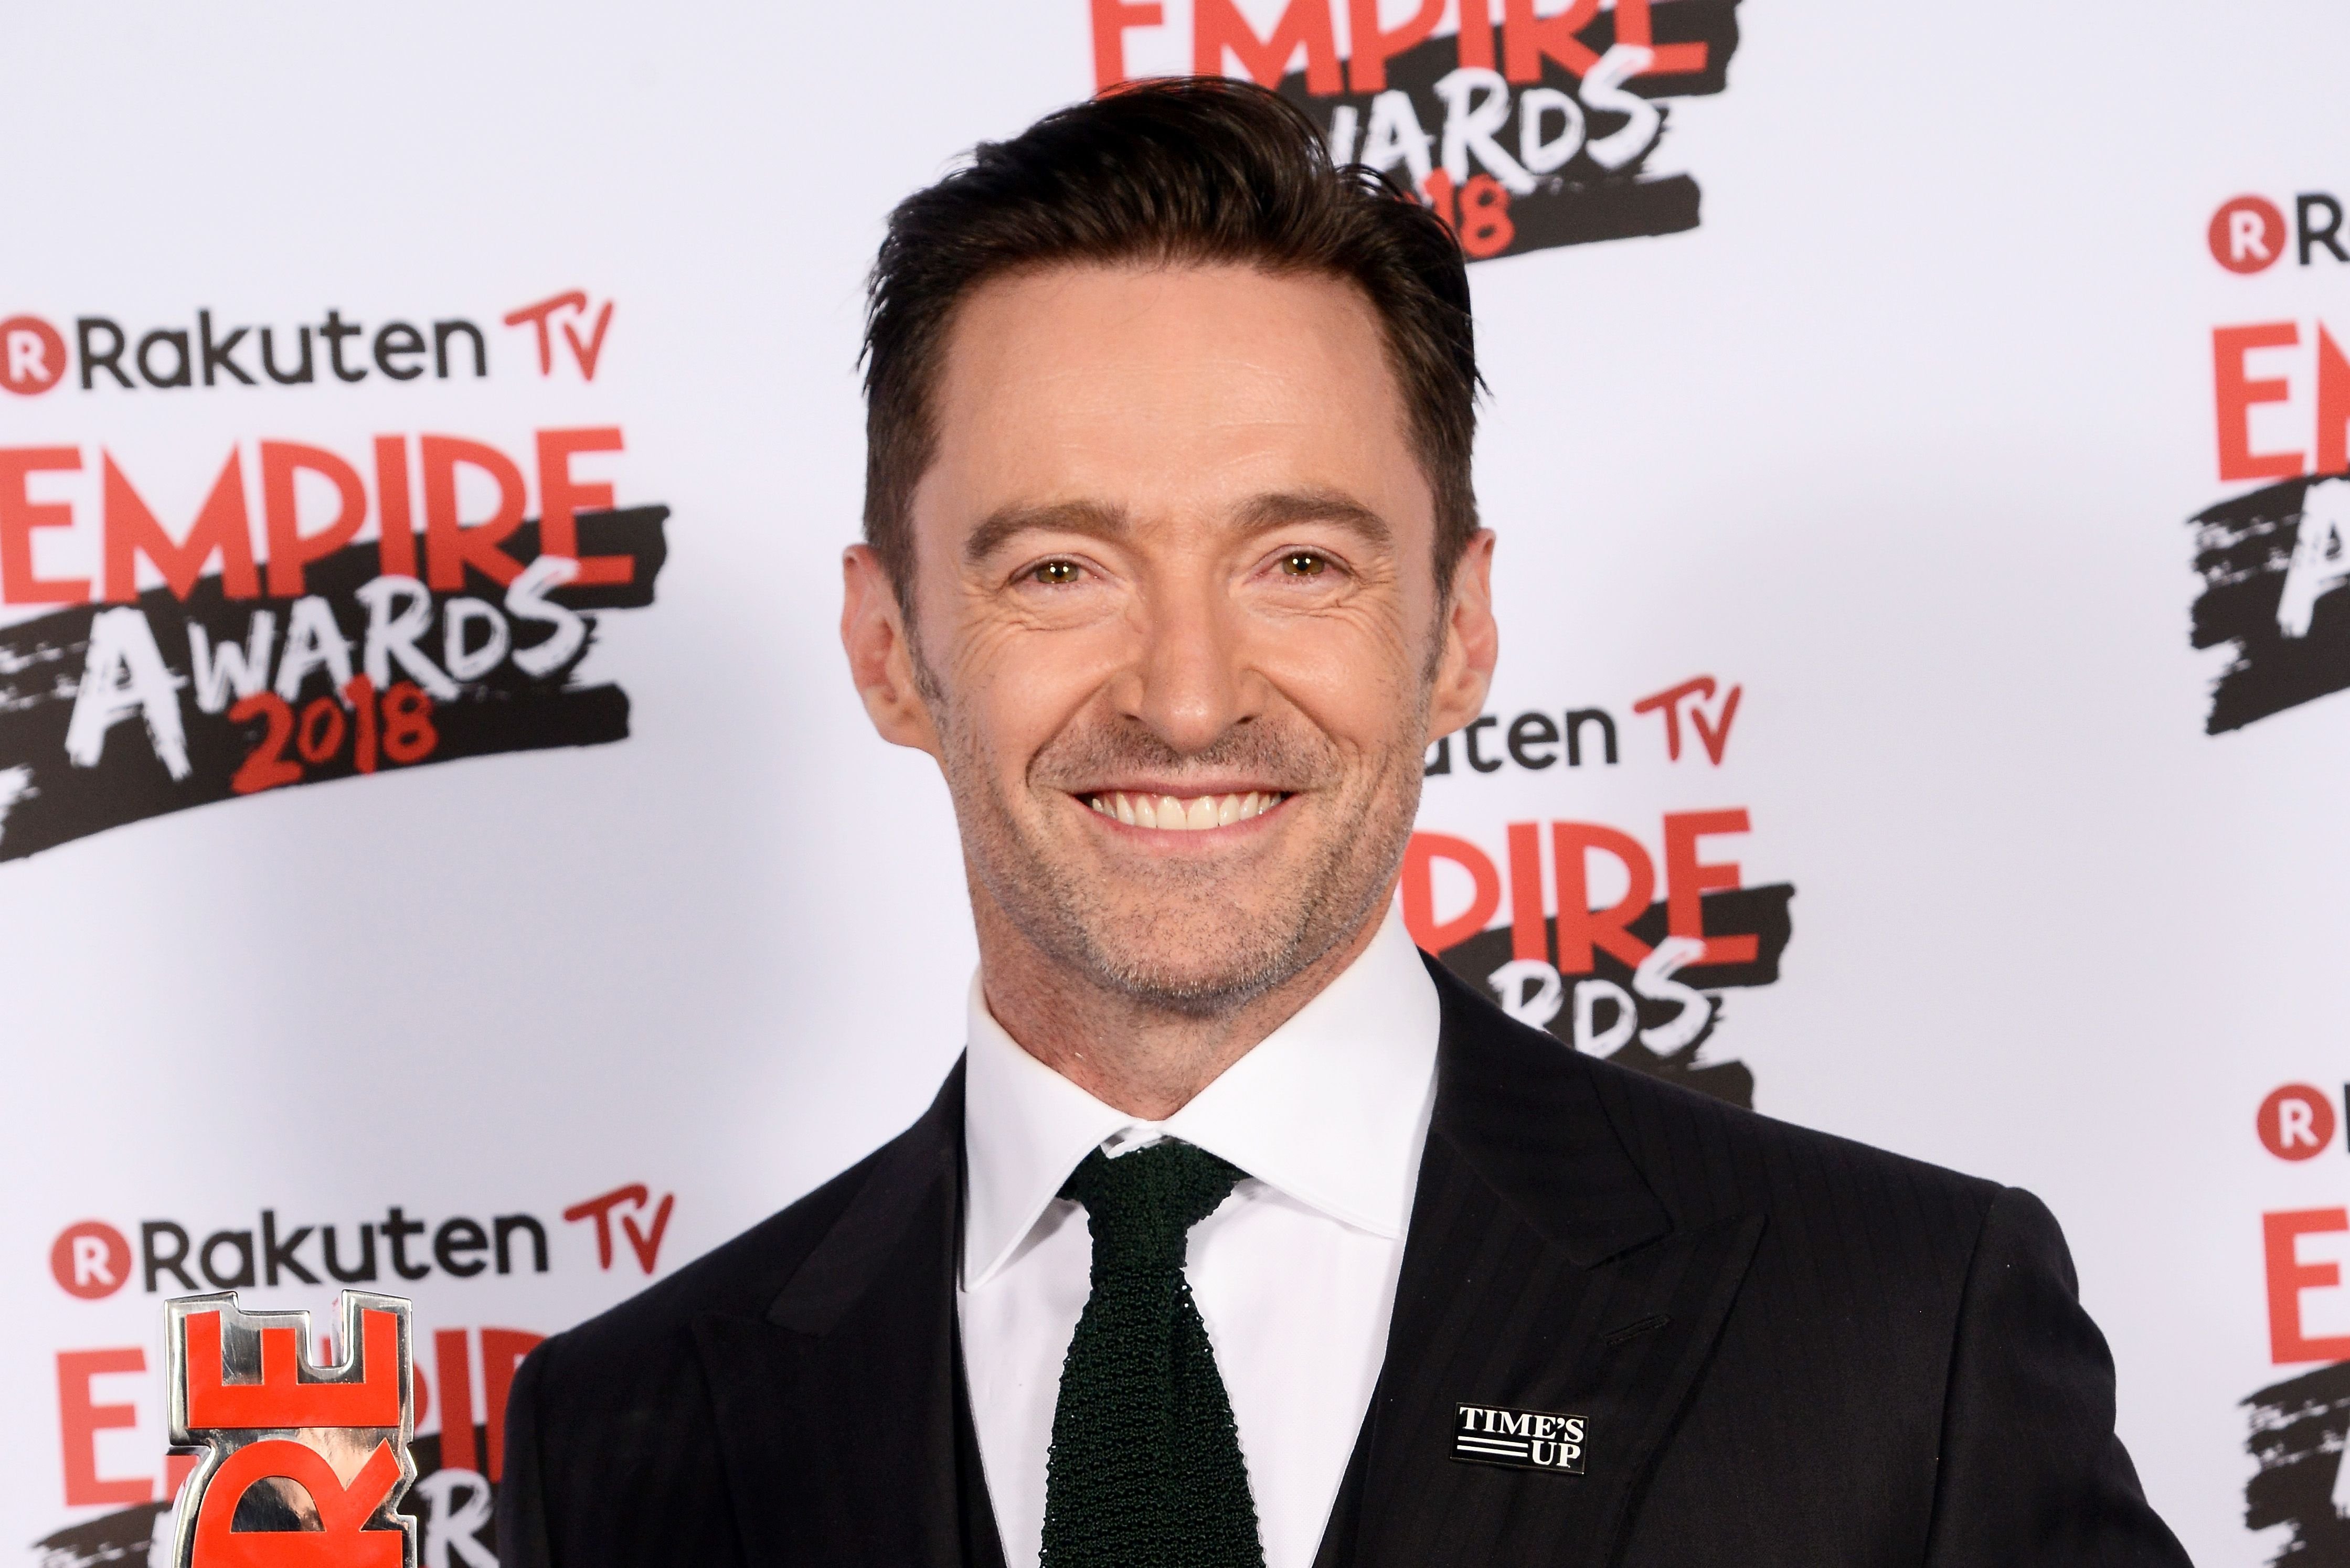 Hugh Jackman at the Rakuten TV EMPIRE Awards 2018 at The Roundhouse on March 18, 2018d. | Photo: Getty Images